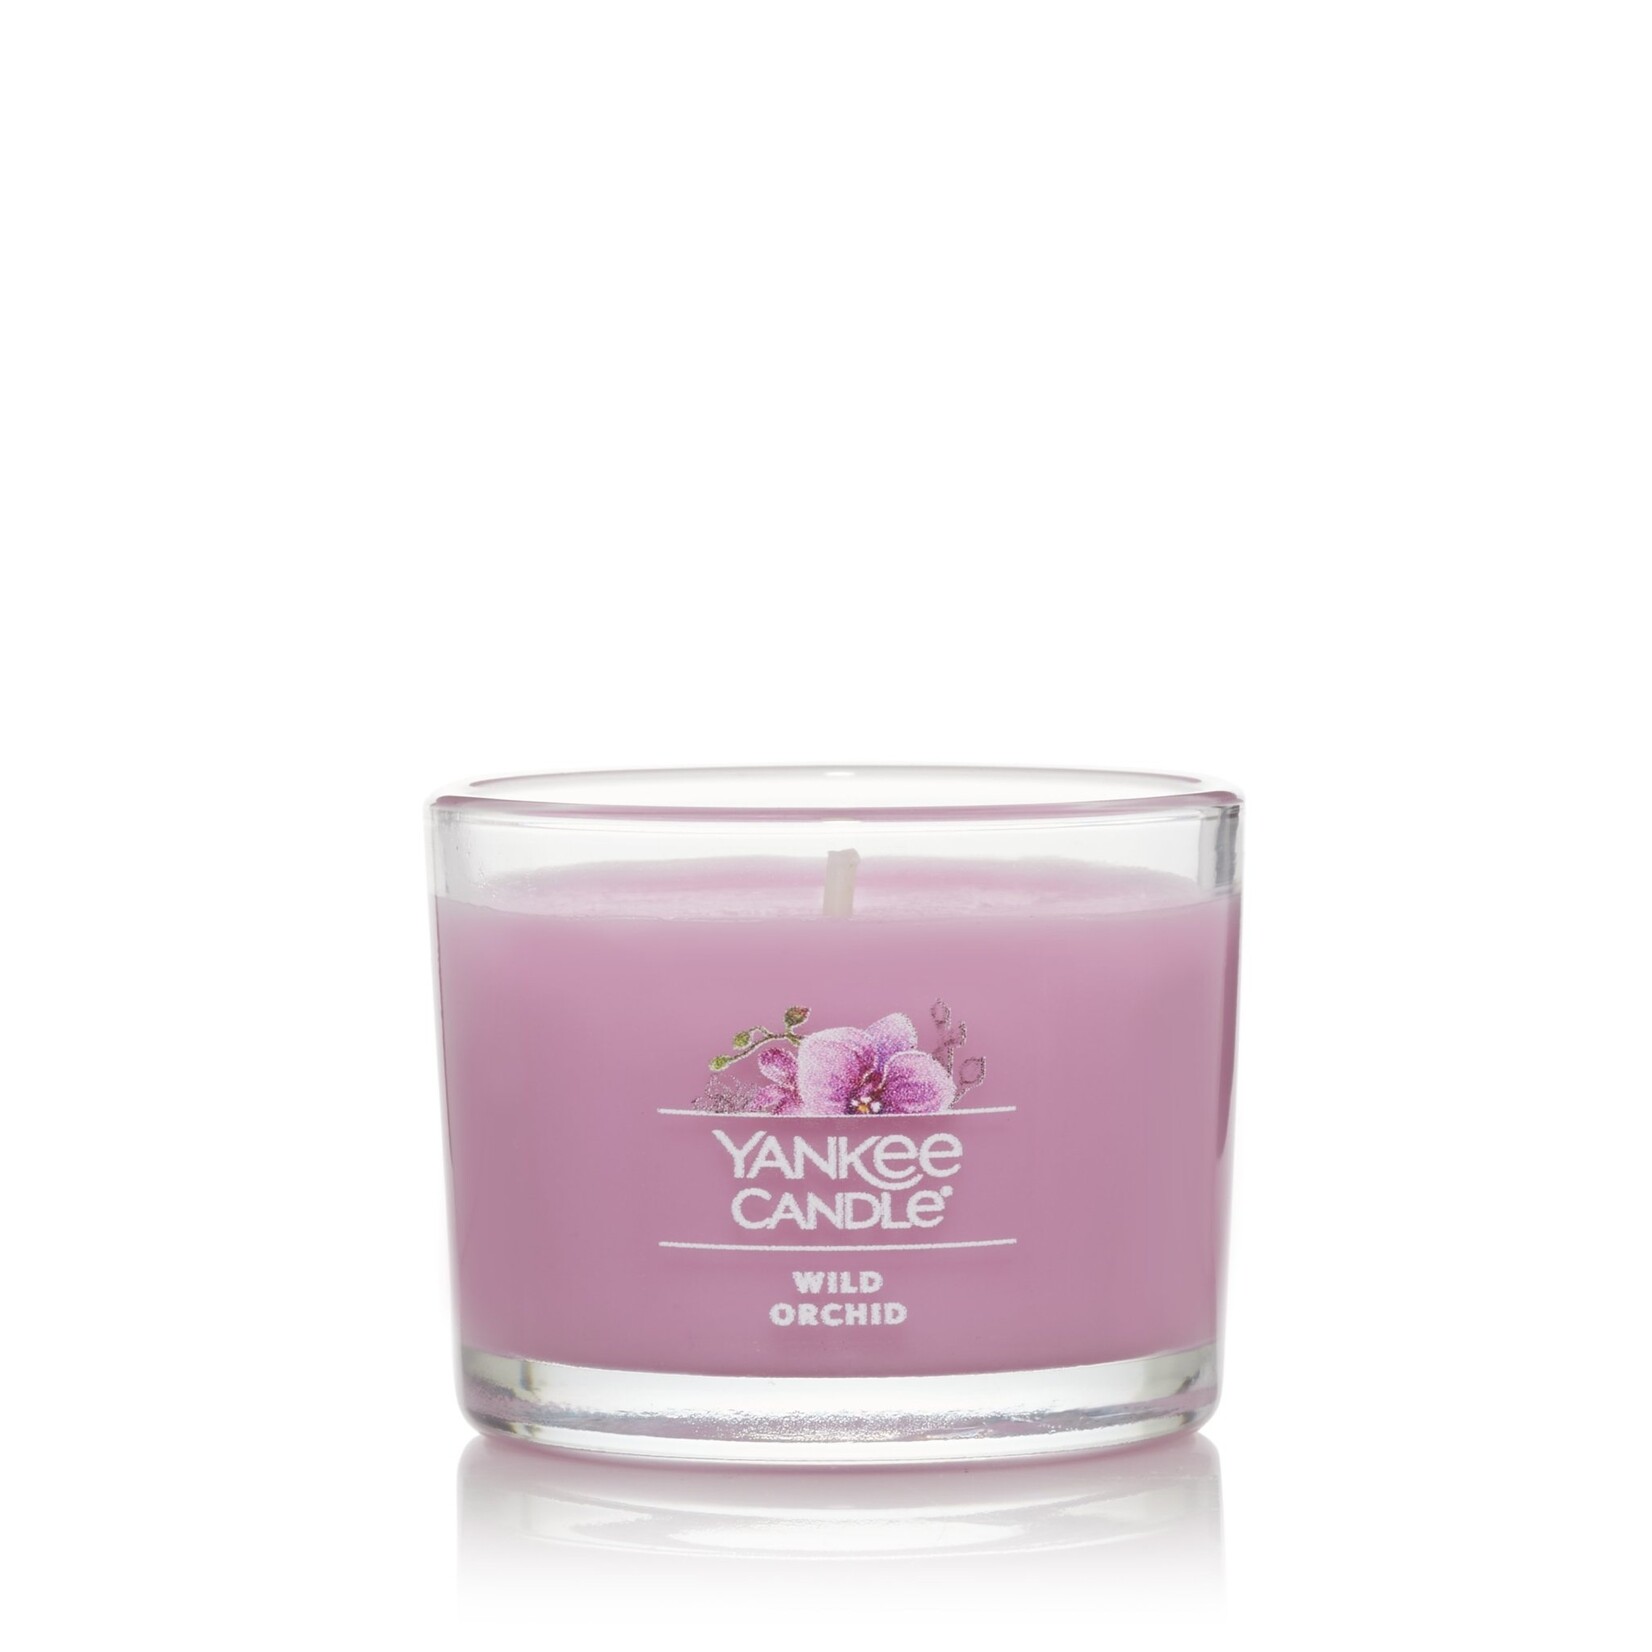 Yankee Candles Yankee Candles Wild Orchid 1.3 oz | 1 Wick